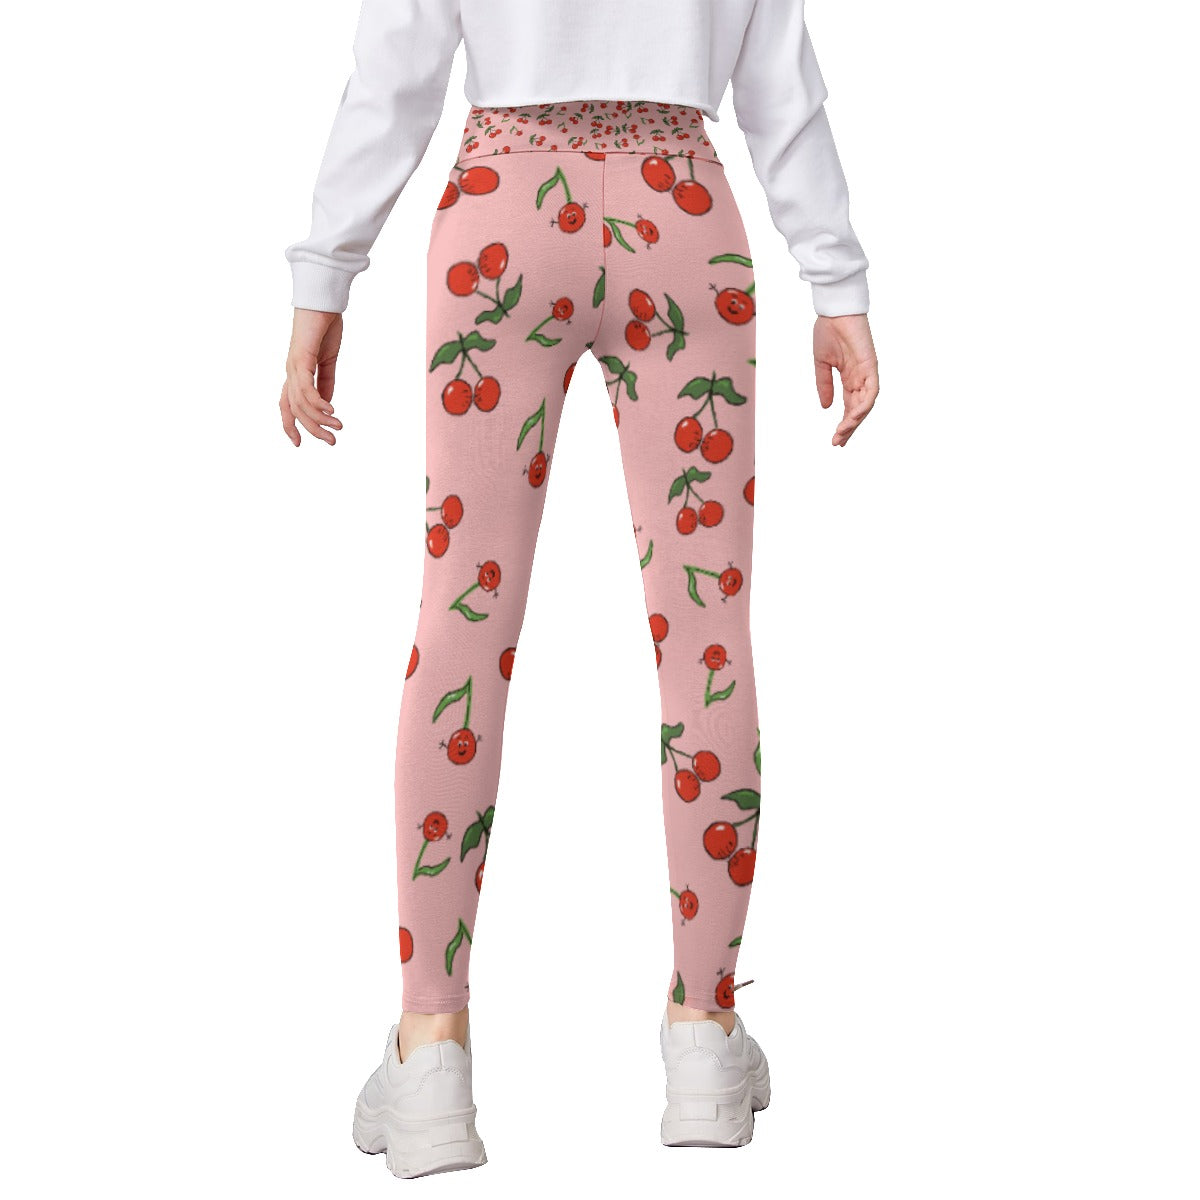 Girls Cherry Leggings with Star - Clothes that Calm